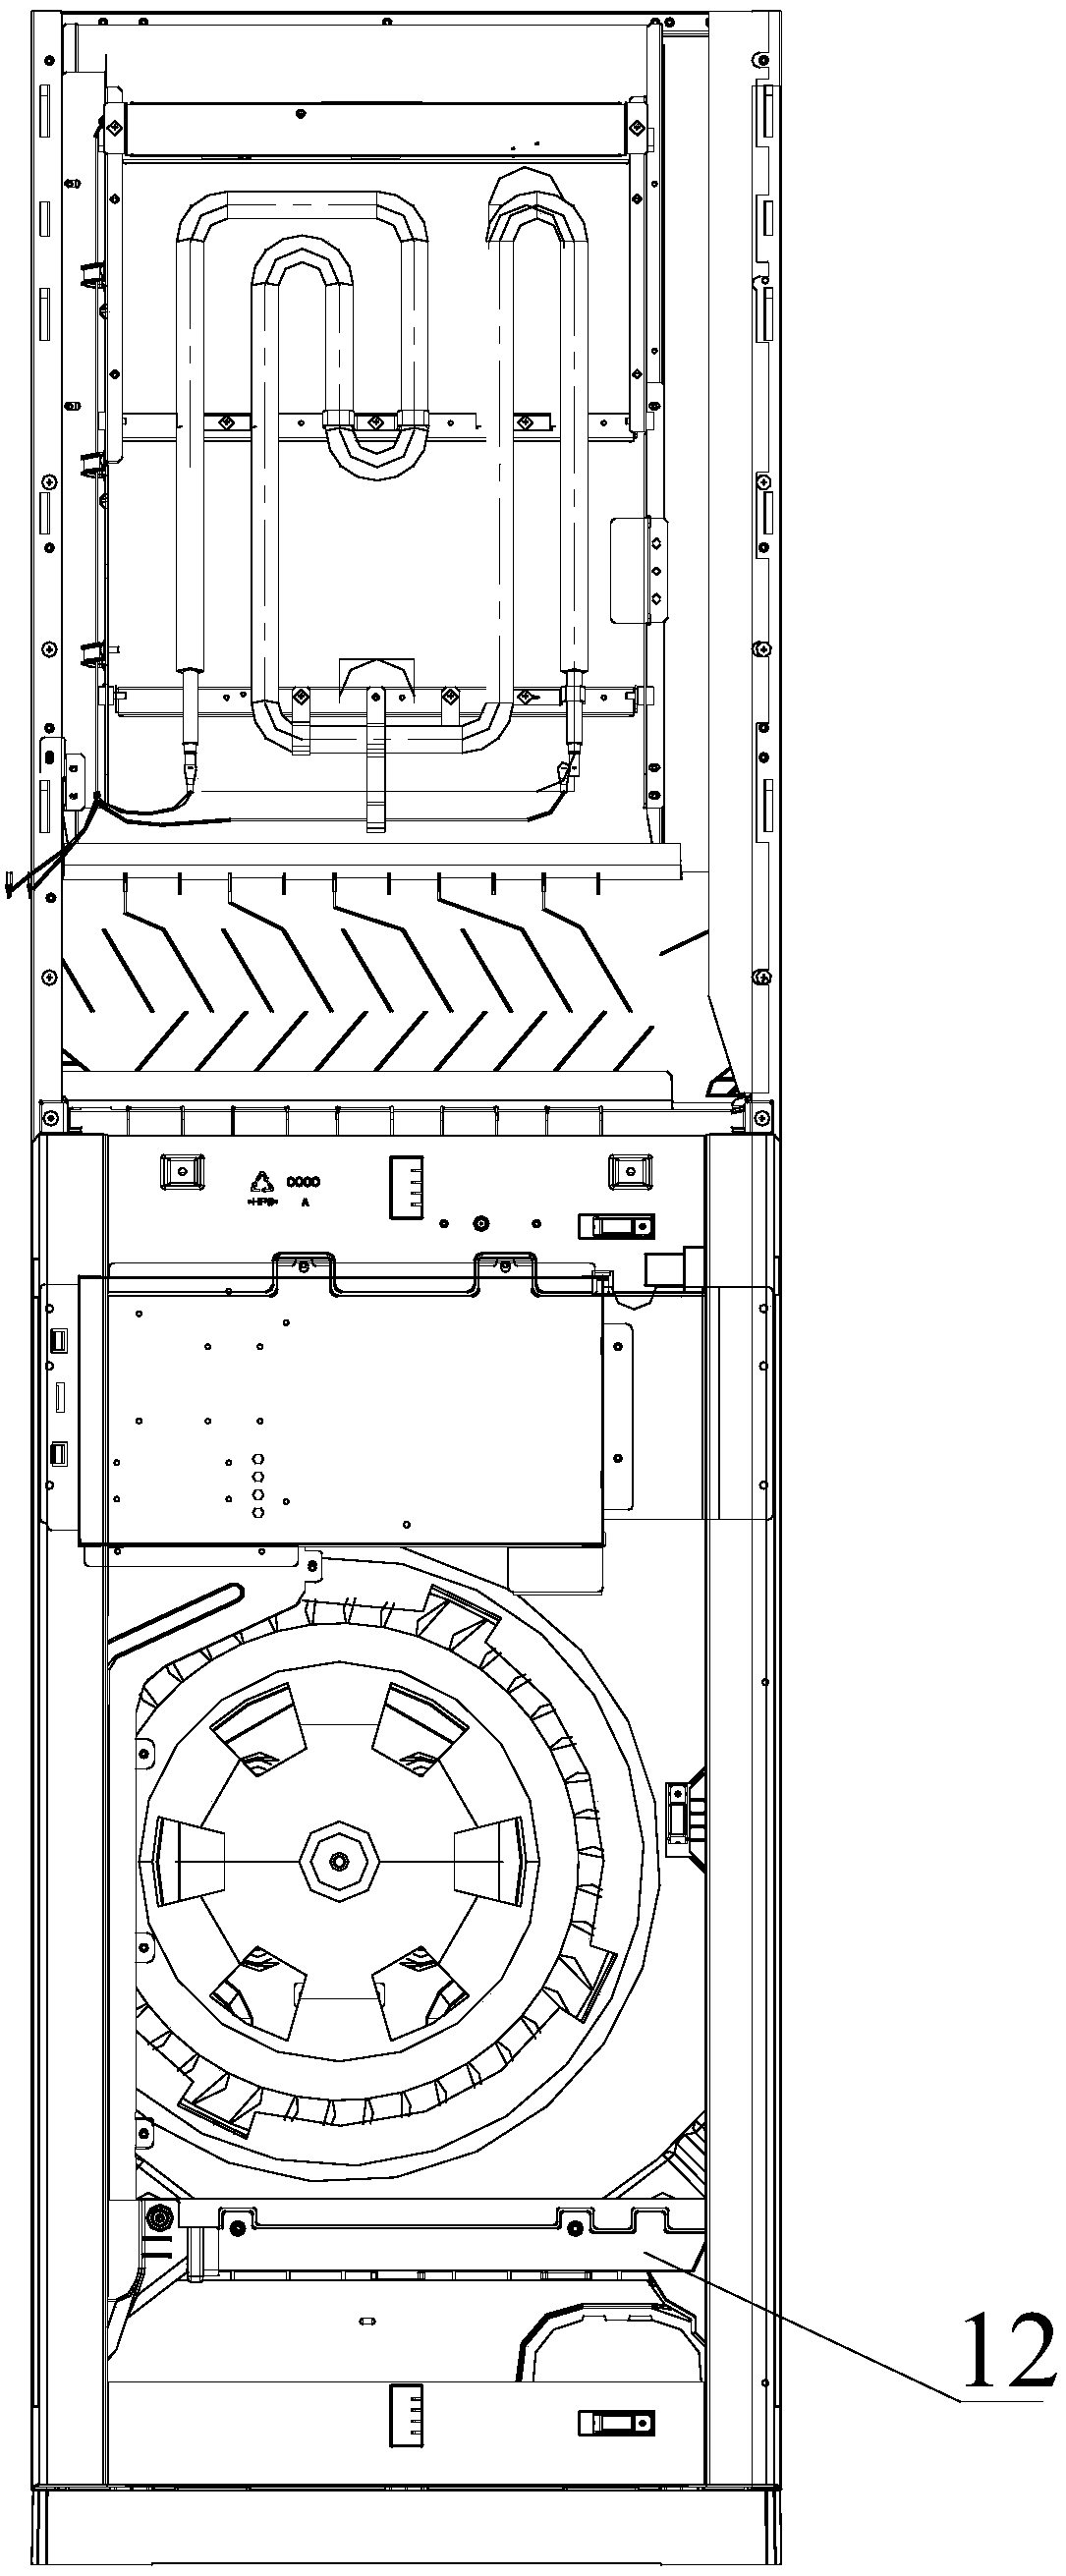 Anti-rodent structure of cabinet machine and air conditioner including the anti-rodent structure